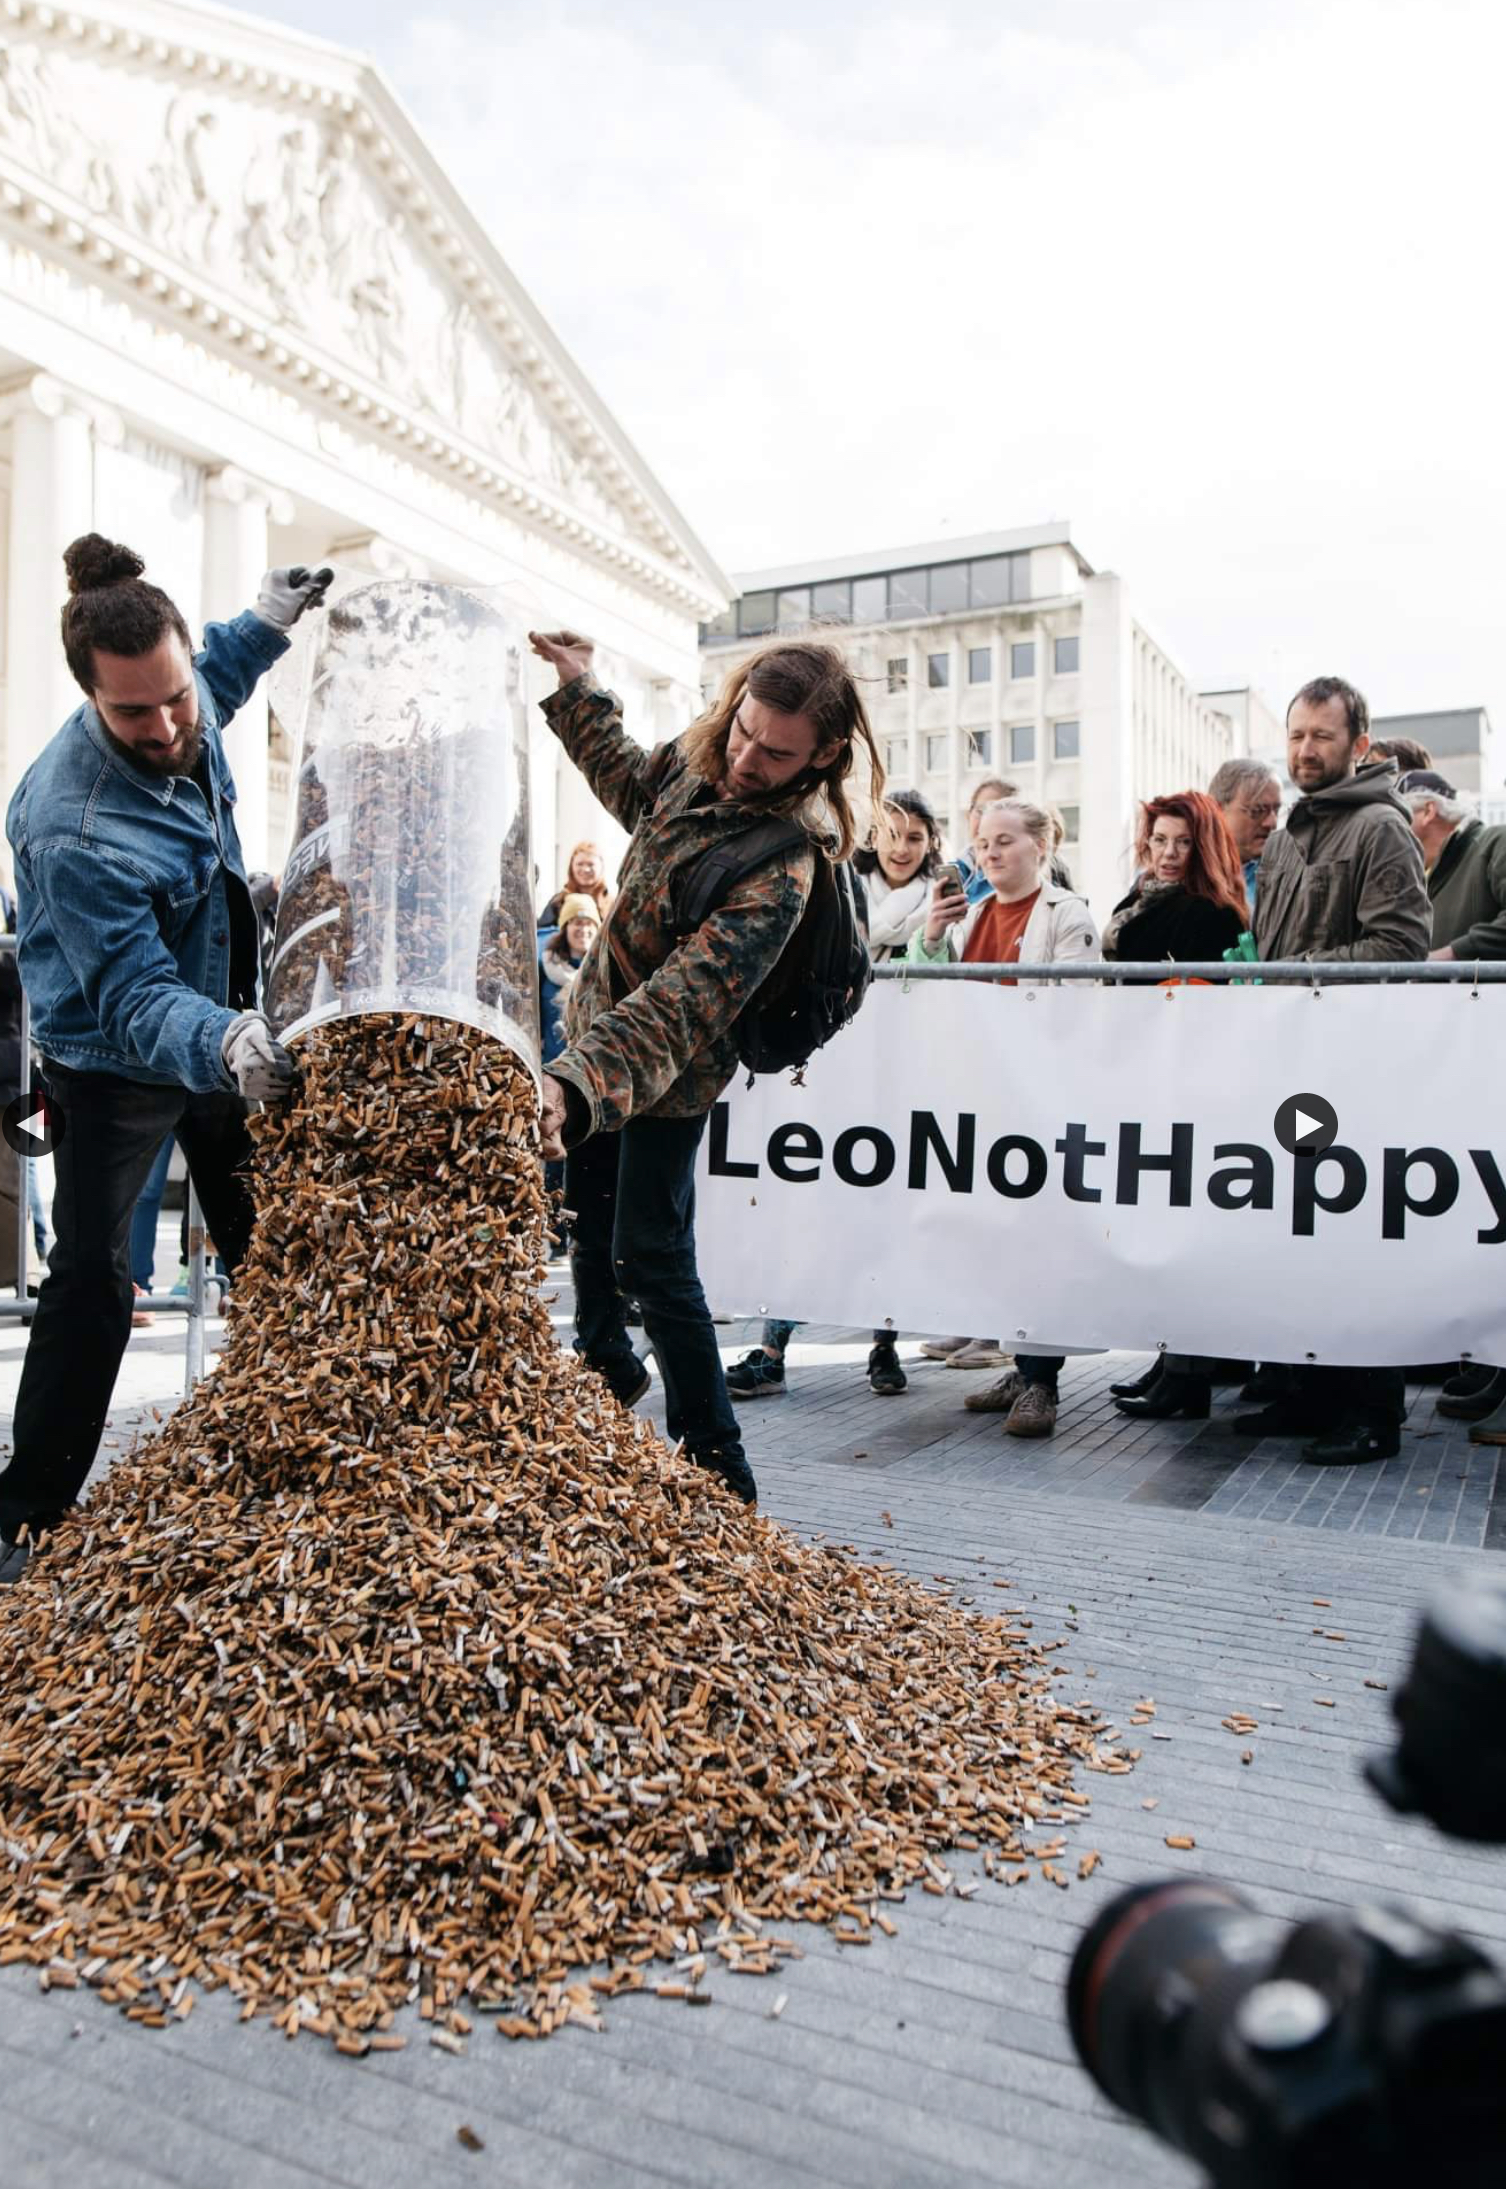 Brussels-based campaigners Leo Not Happy collected thousands of cigarette butts on multiple cleanups around the city, raising awareness of the situation. Their voices were heard.